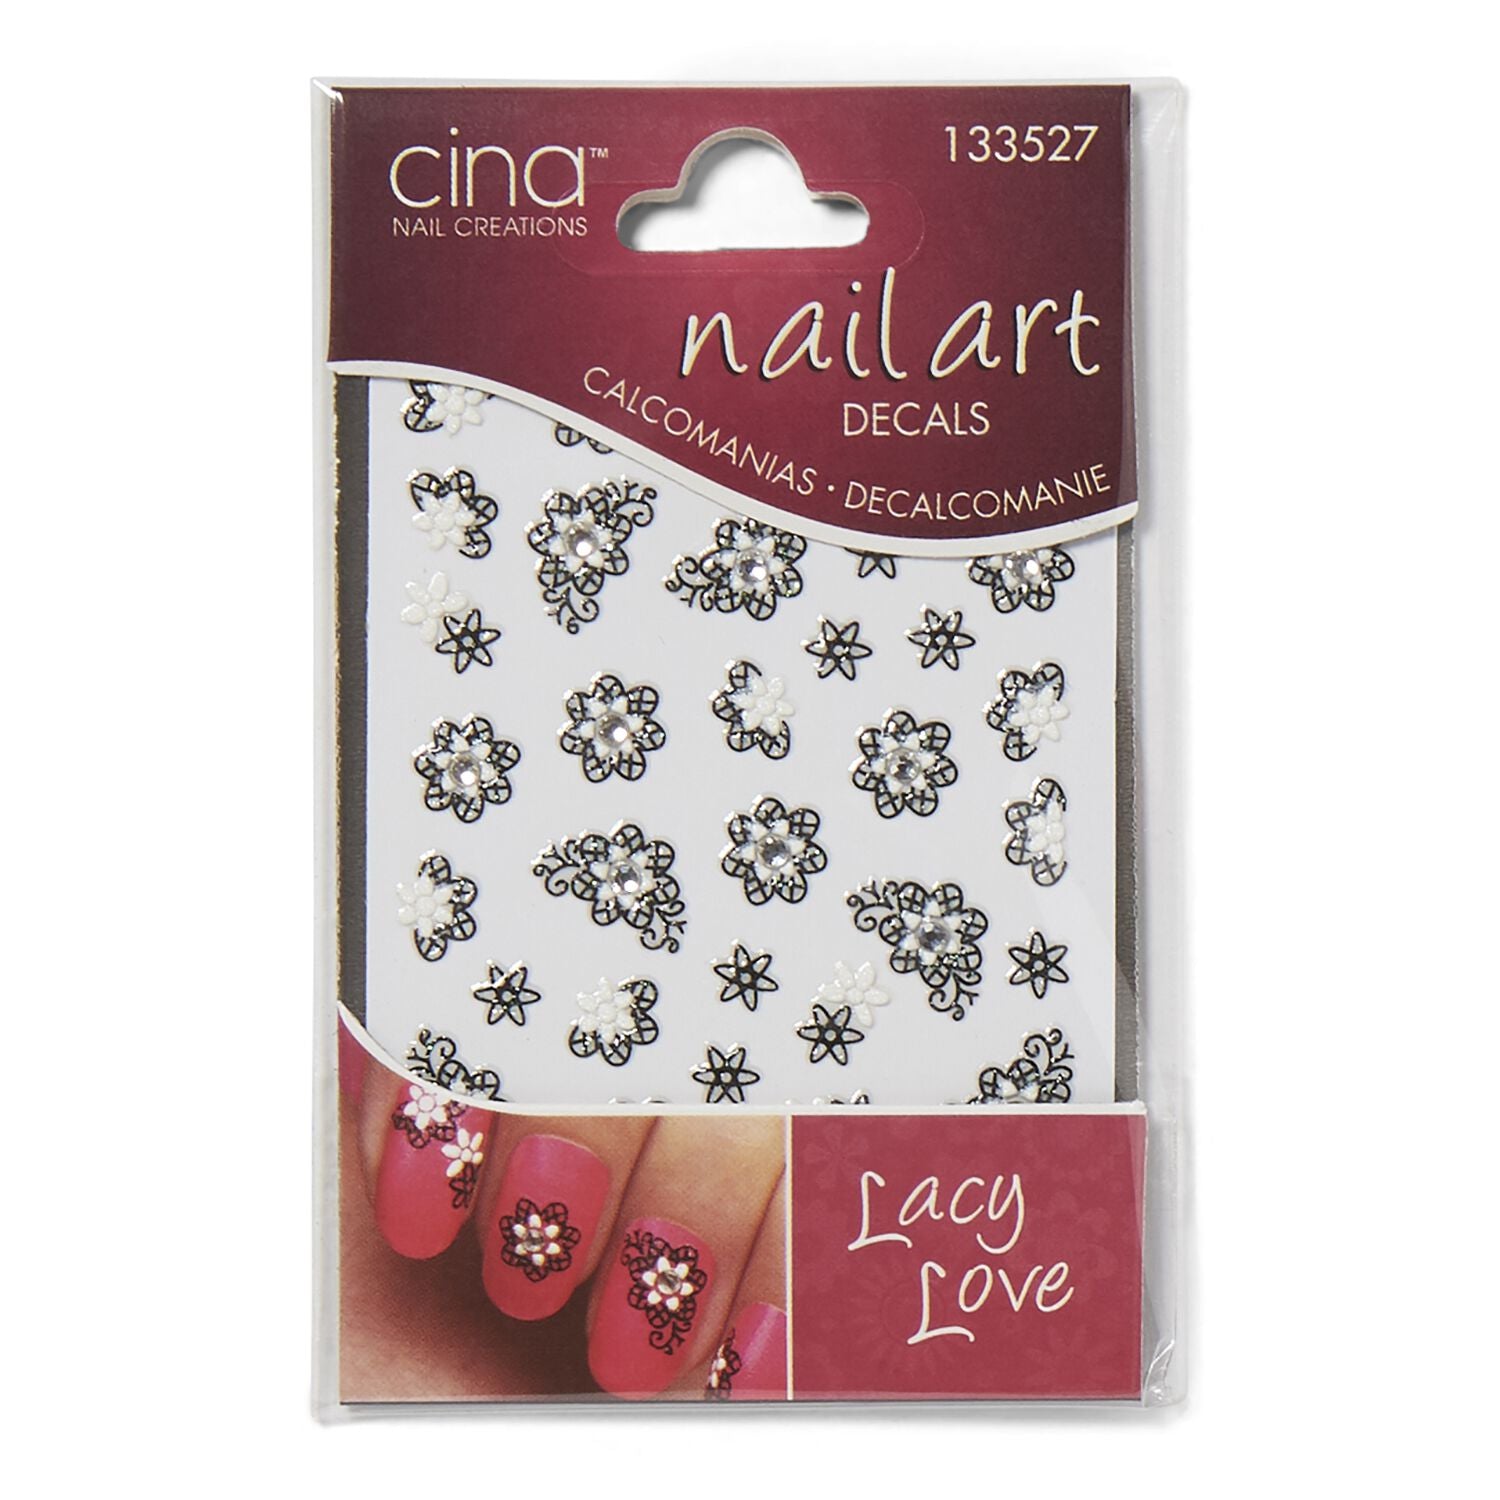 Cina Nail Creations Lacey Love 3D Nail Art Jewelry Decals